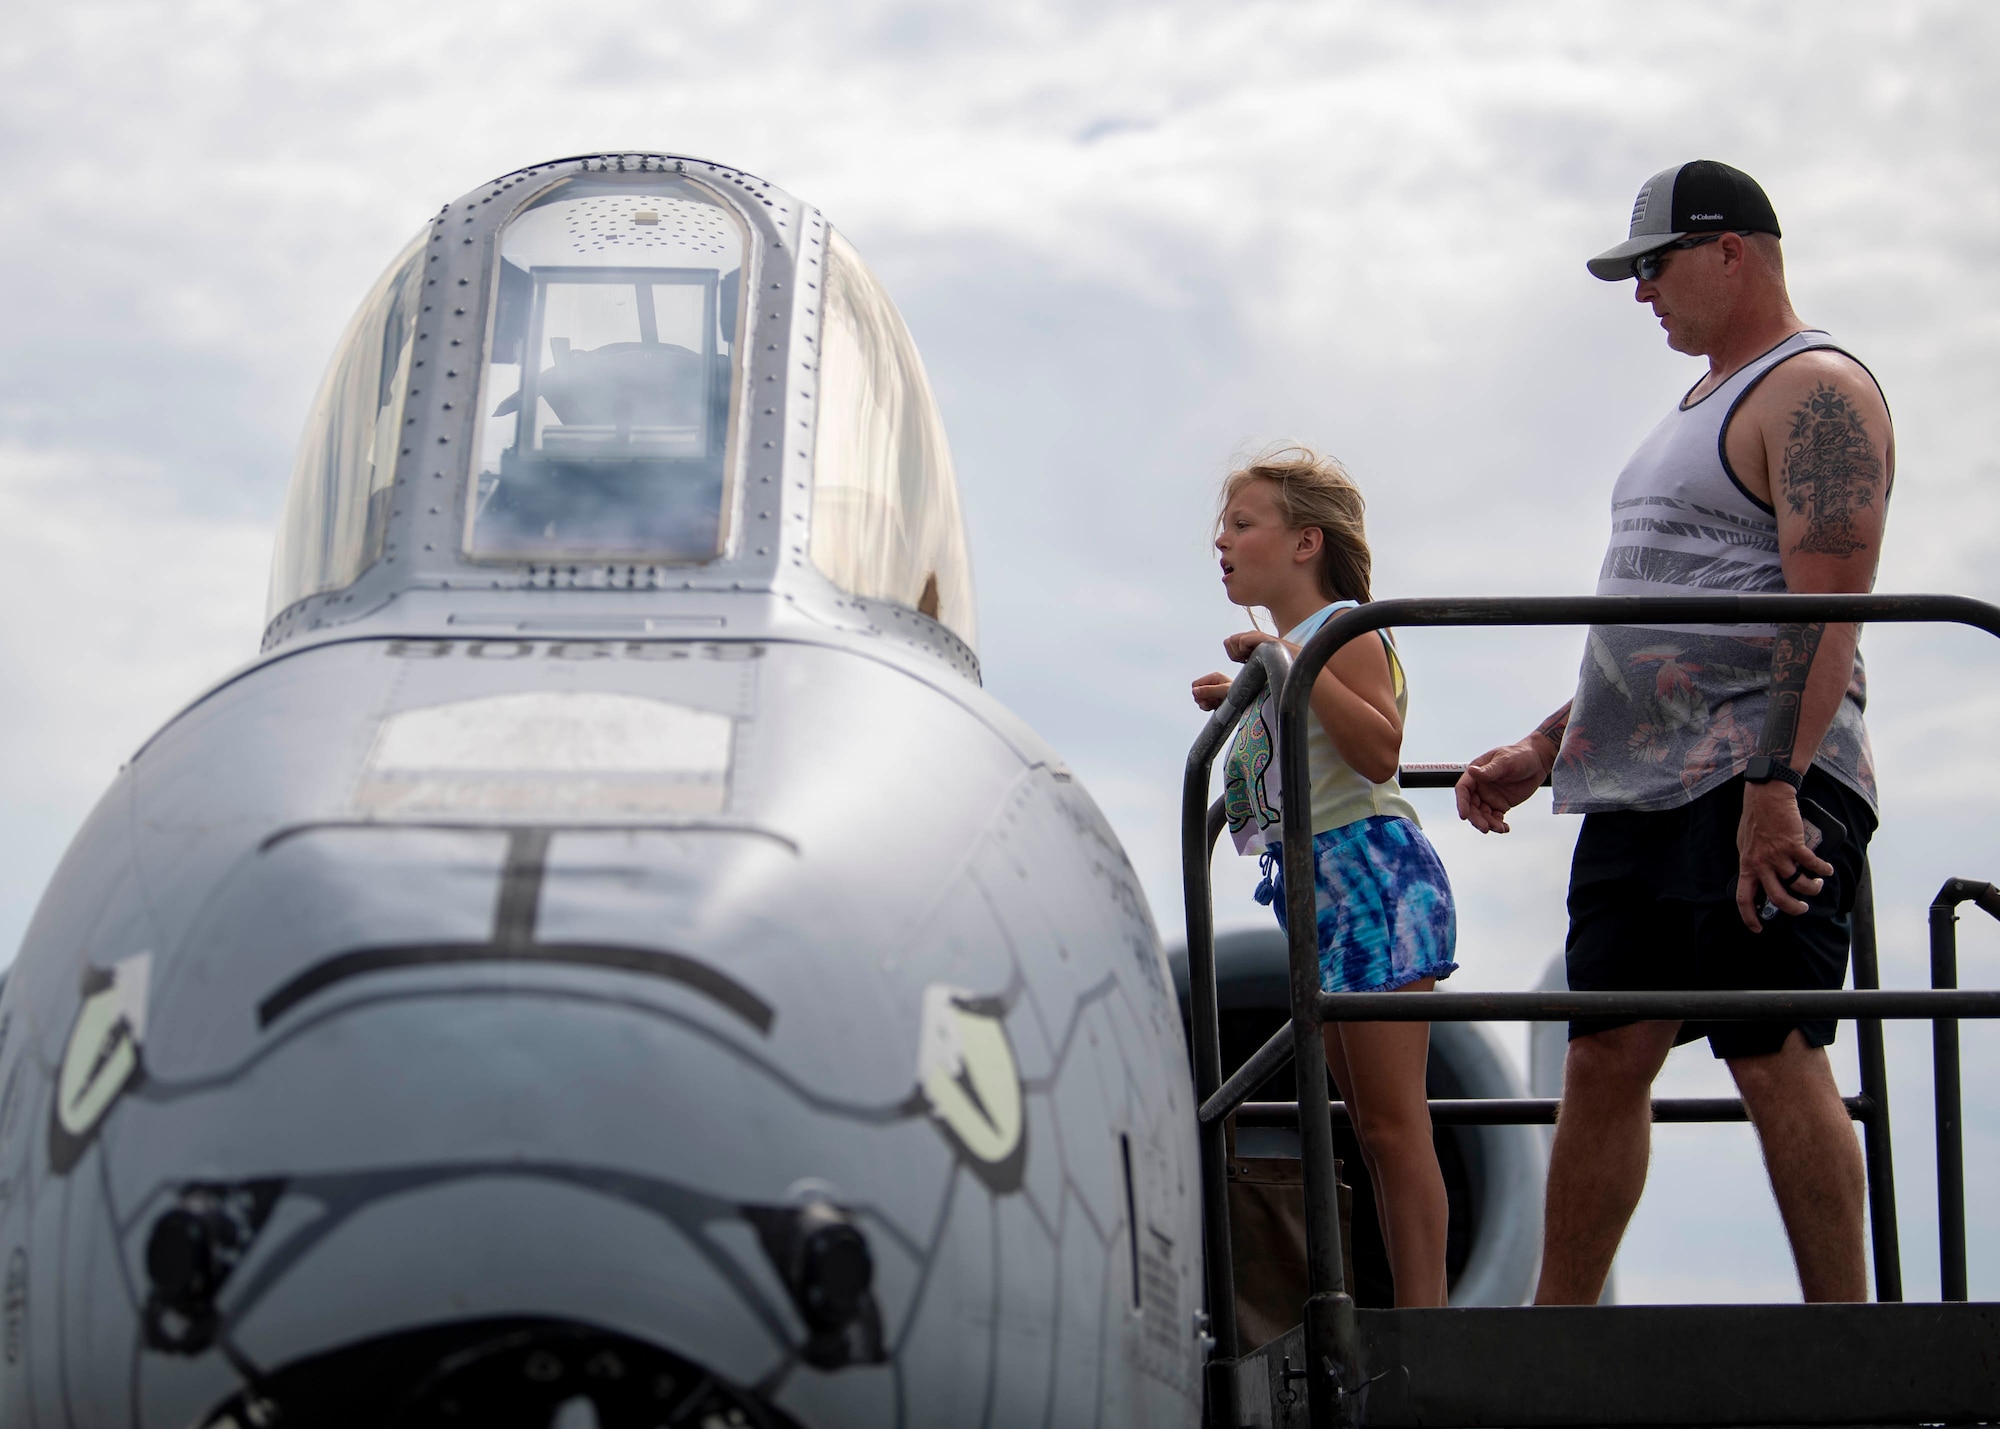 A family marvels at the A-10 Thunderbolt II during the 2022 Thunder Over Dover Airshow, May 22, 2022, at Dover Air Force Base, Delaware. The event was the first airshow and open house held at Dover AFB since September 2019. (U.S. Air Force Photo by Tech. Sgt. J.D. Strong II)